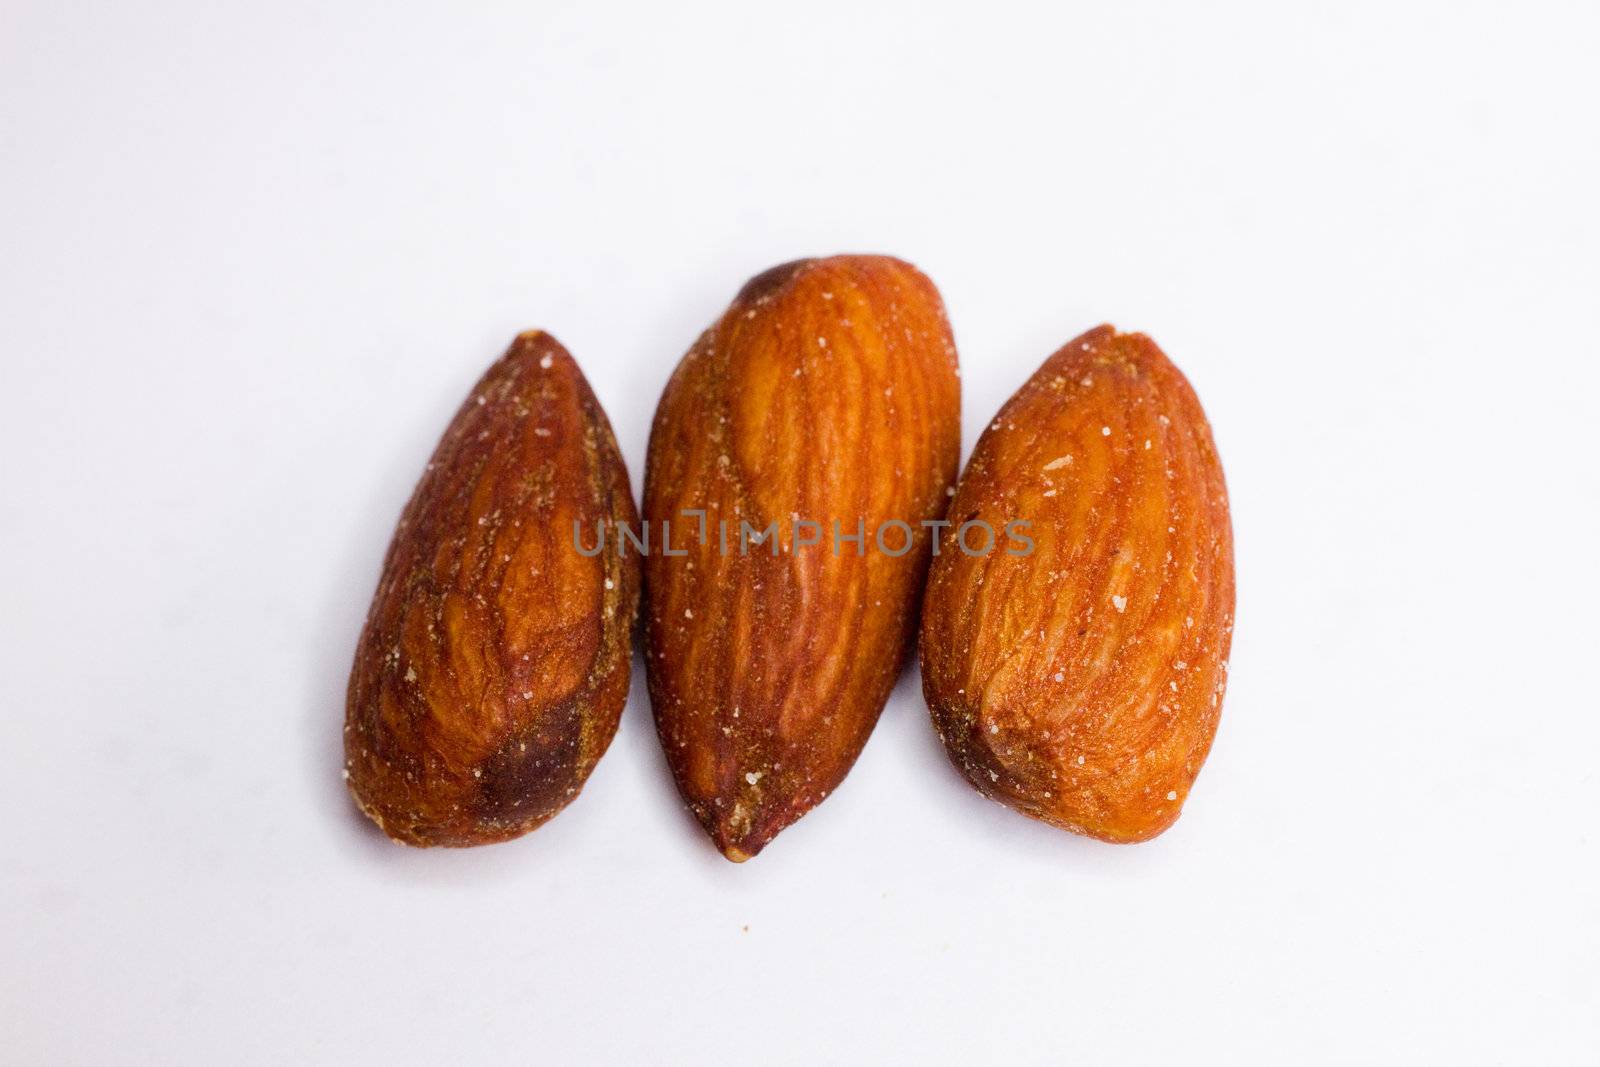 Three close-up shot of three salted roasted almonds